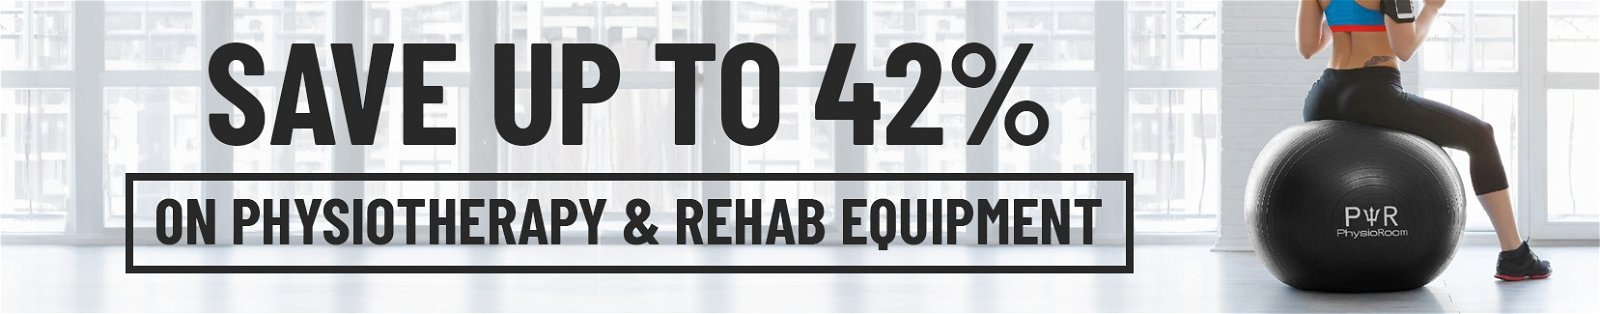 save up to 42% on physiotherapy & rehab equipment